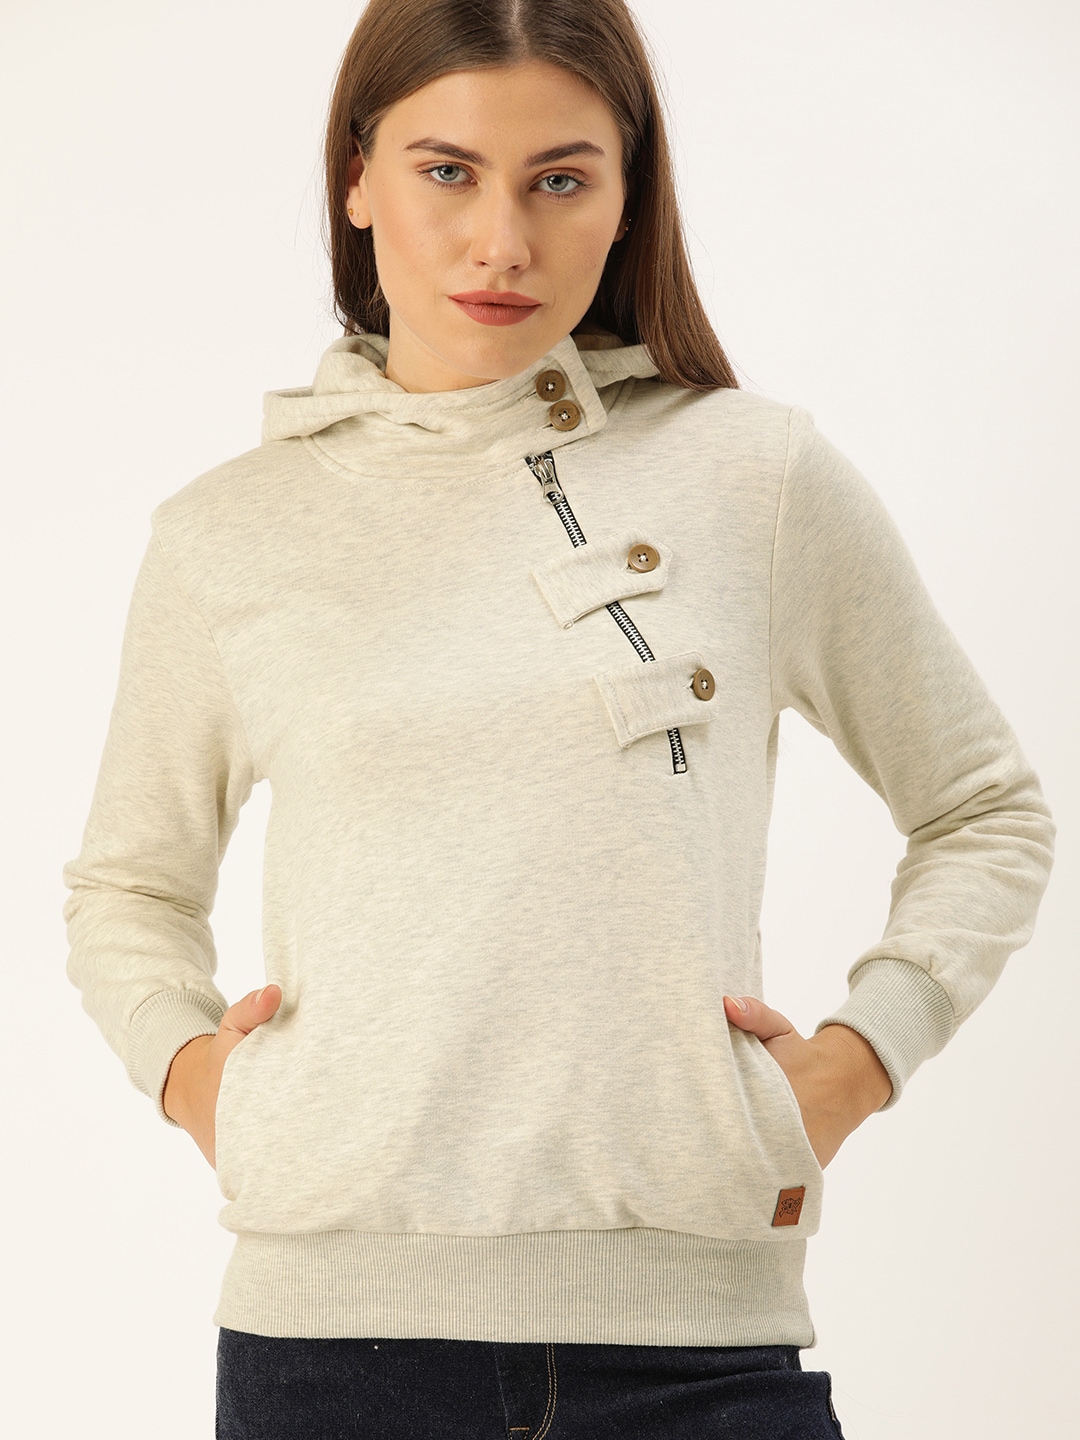 Campus Sutra Women Off-White Solid Hooded Sweatshirt Price in India